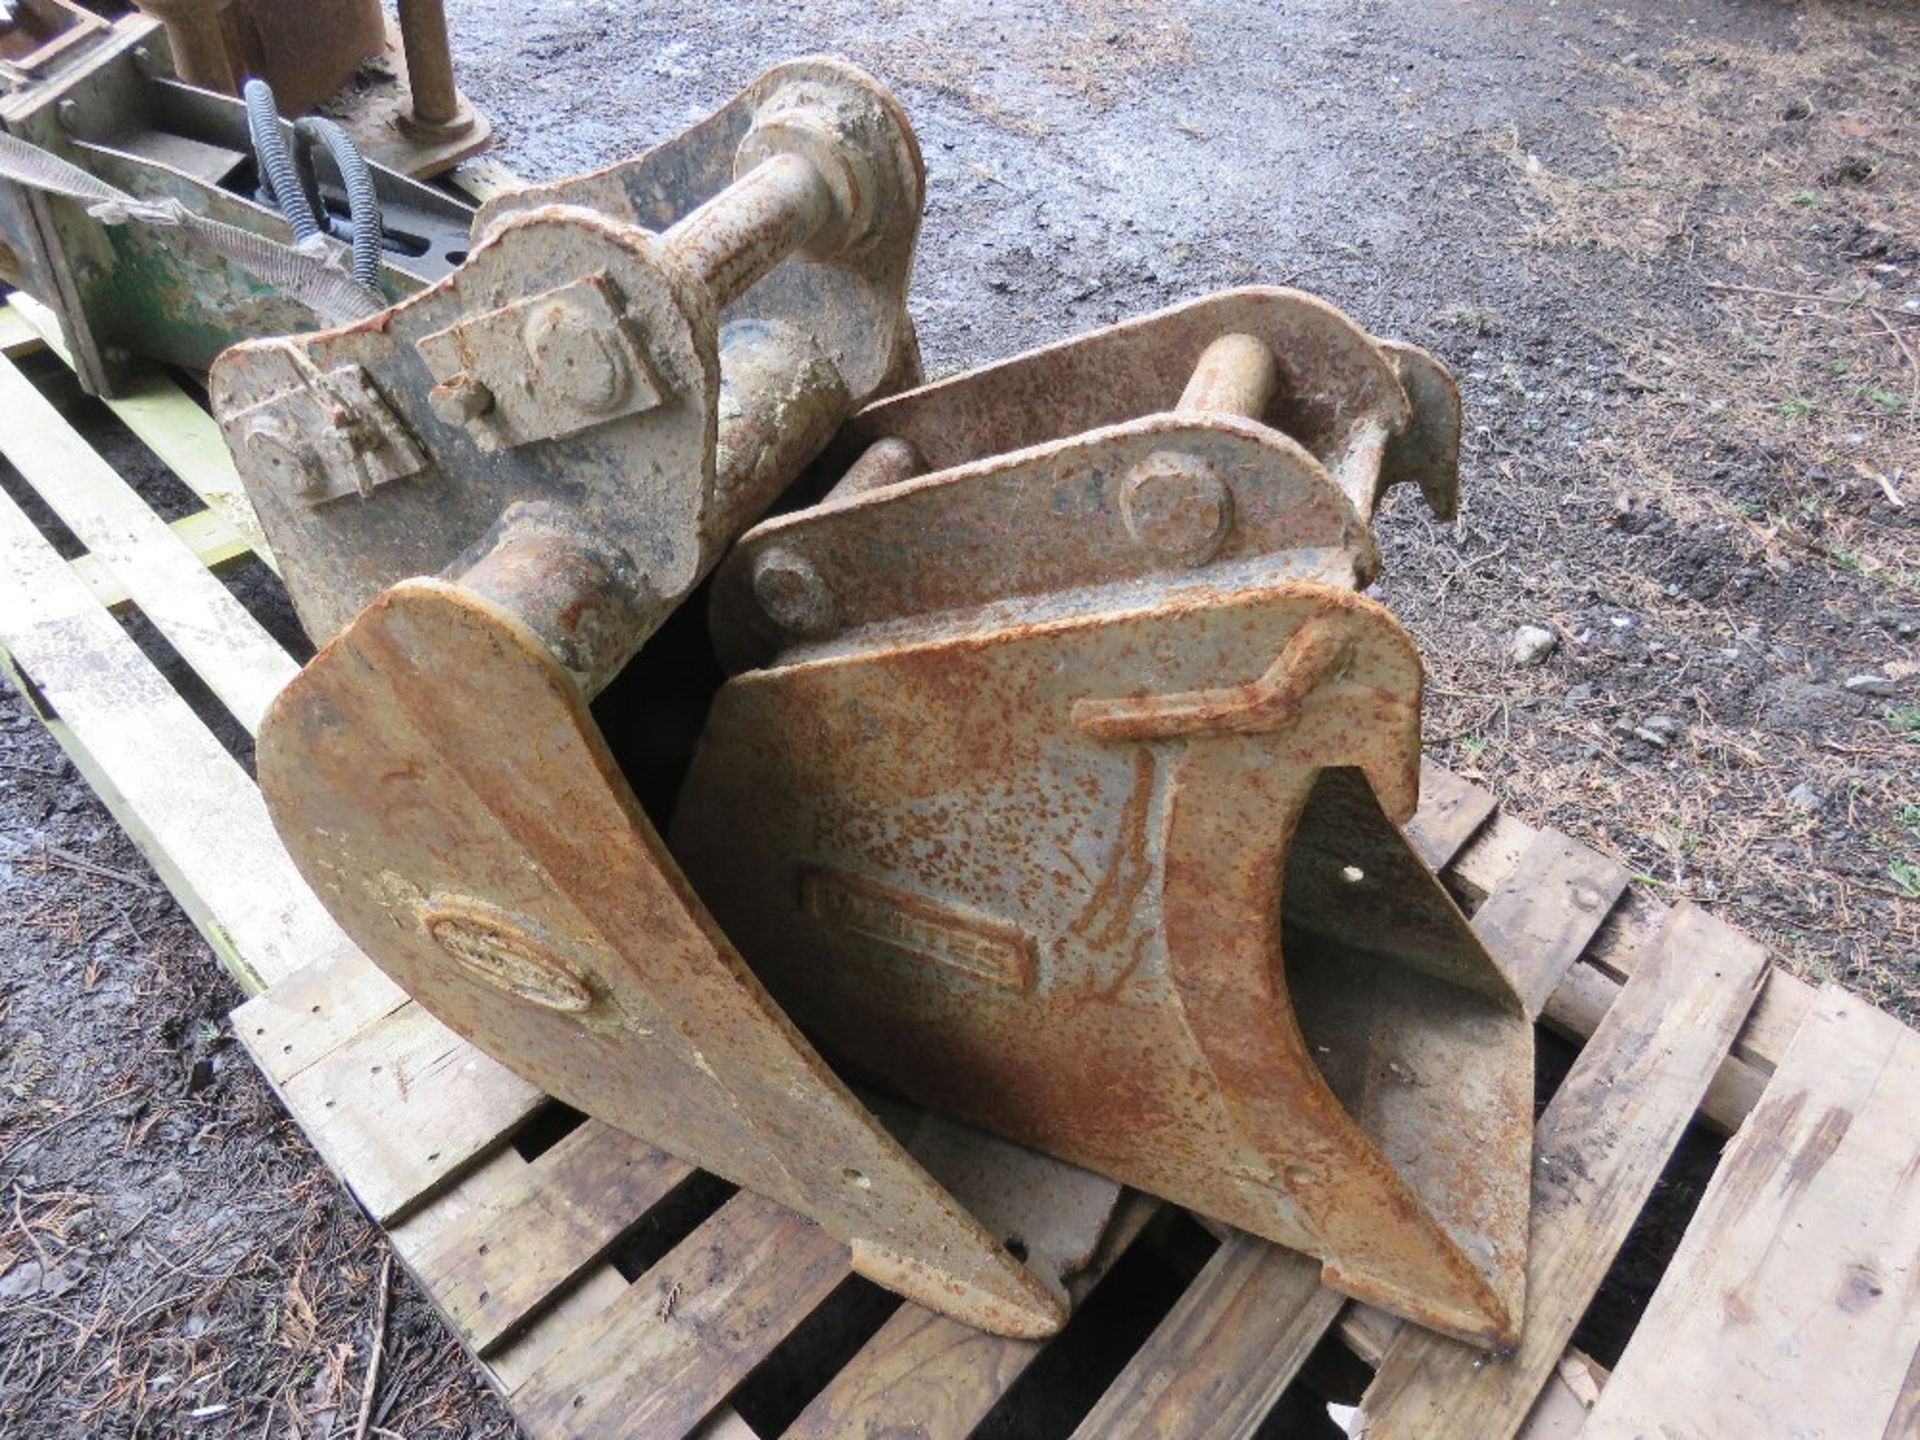 2 X EXCAVATOR BUCKETS ON 45MM PINS: 18" AND 12" WIDTH APPROX.